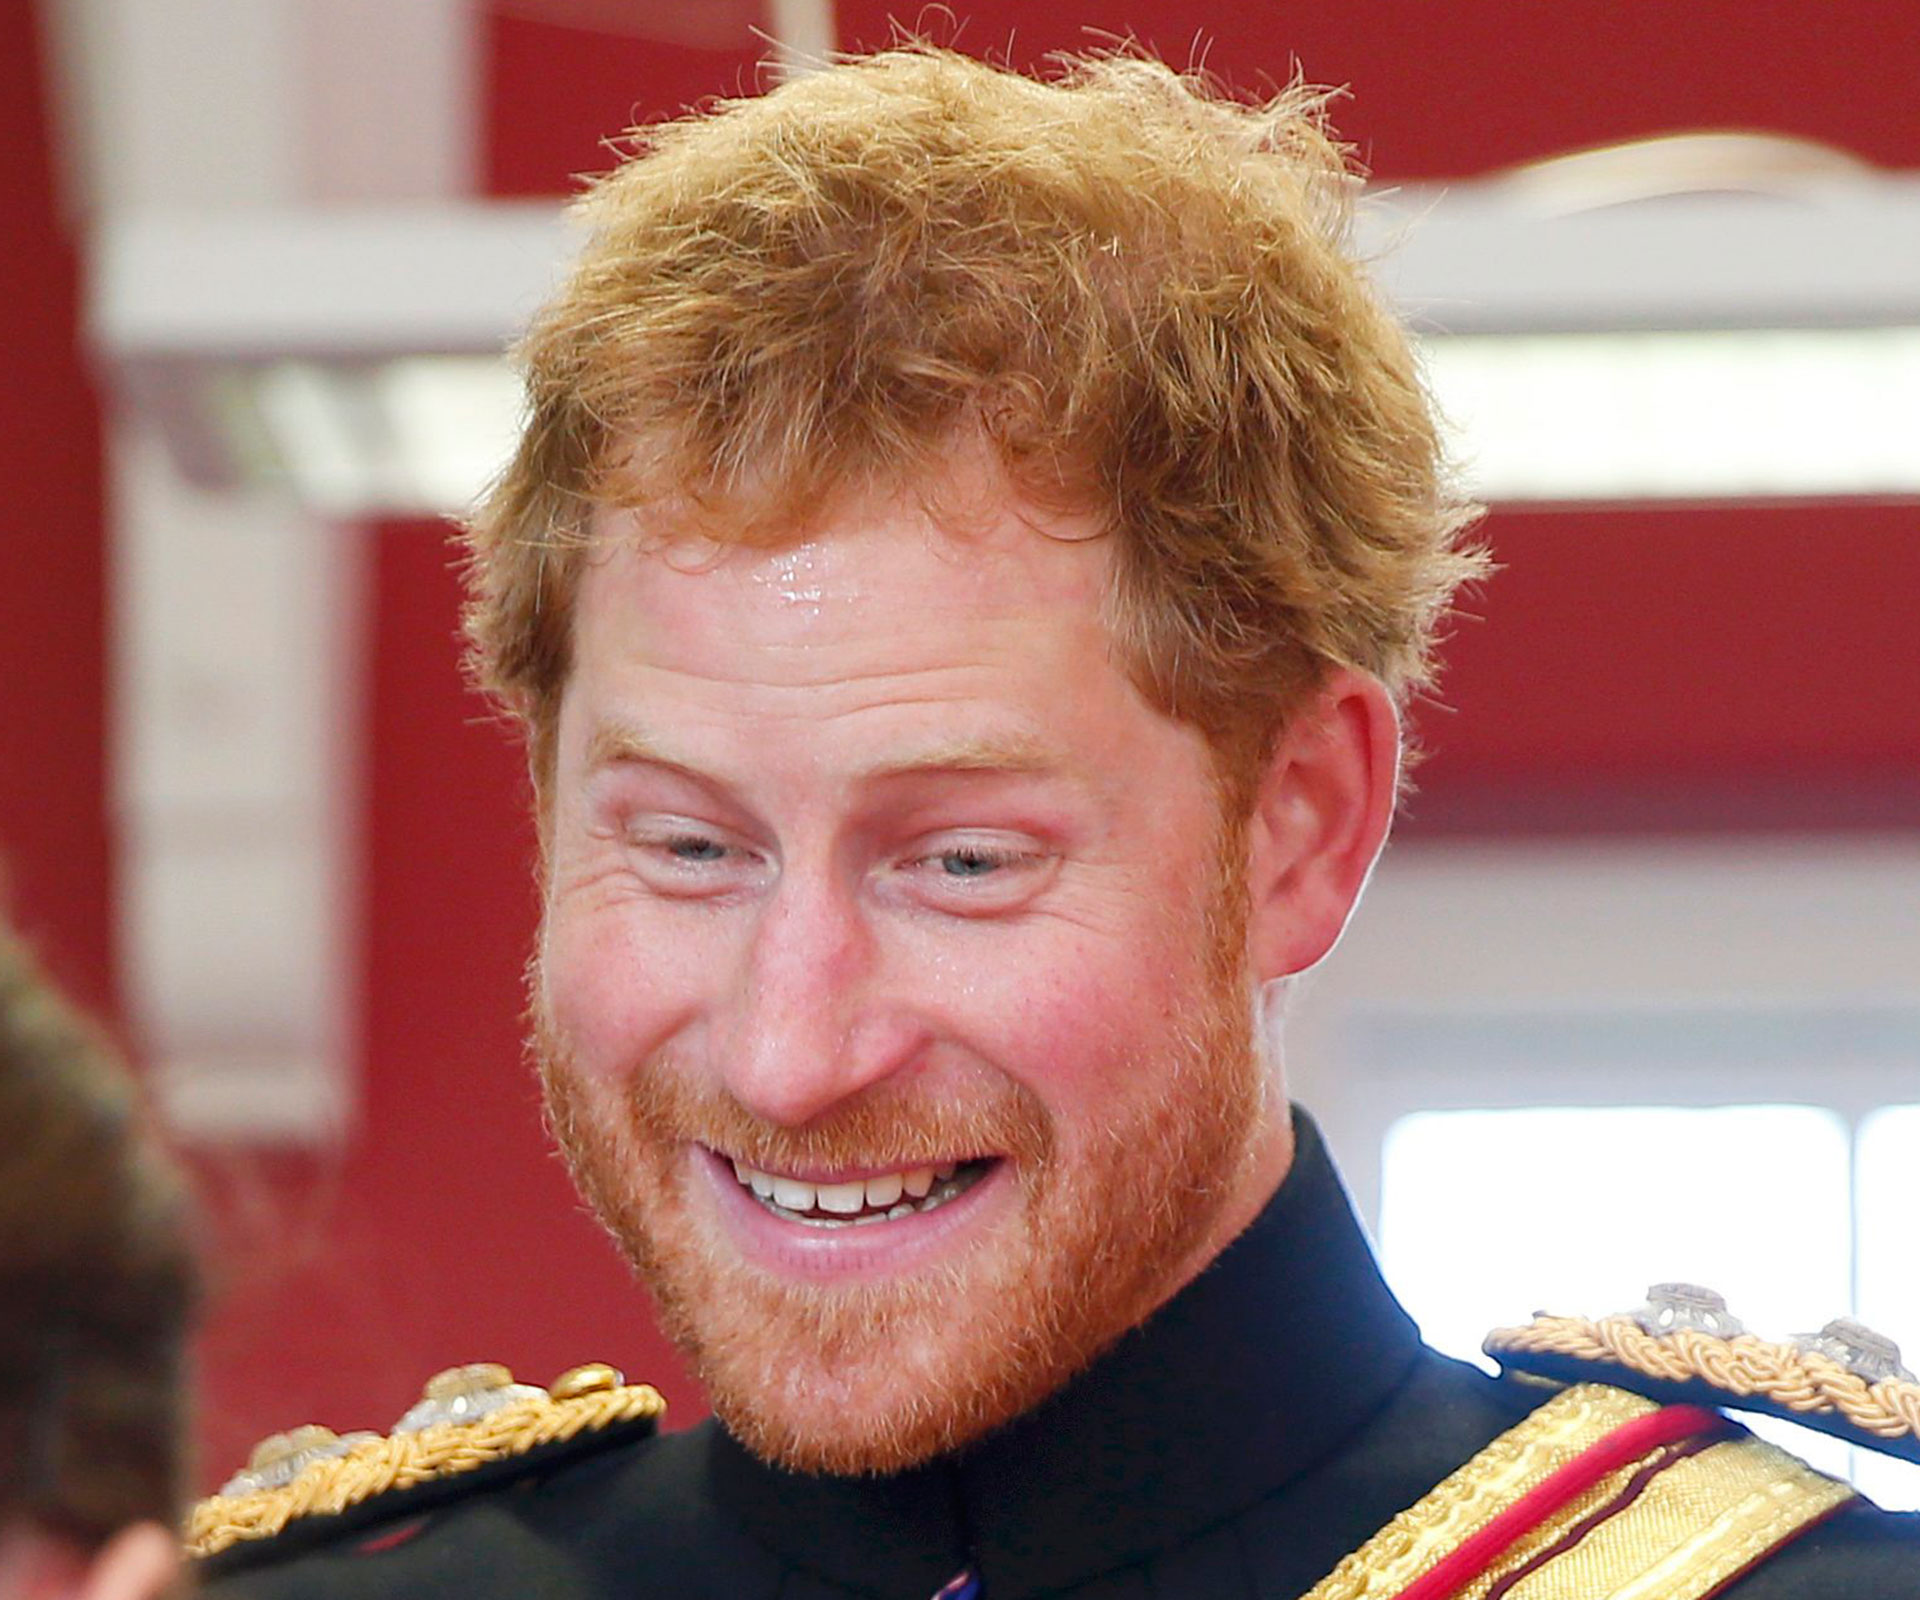 The funny faces of Prince Harry